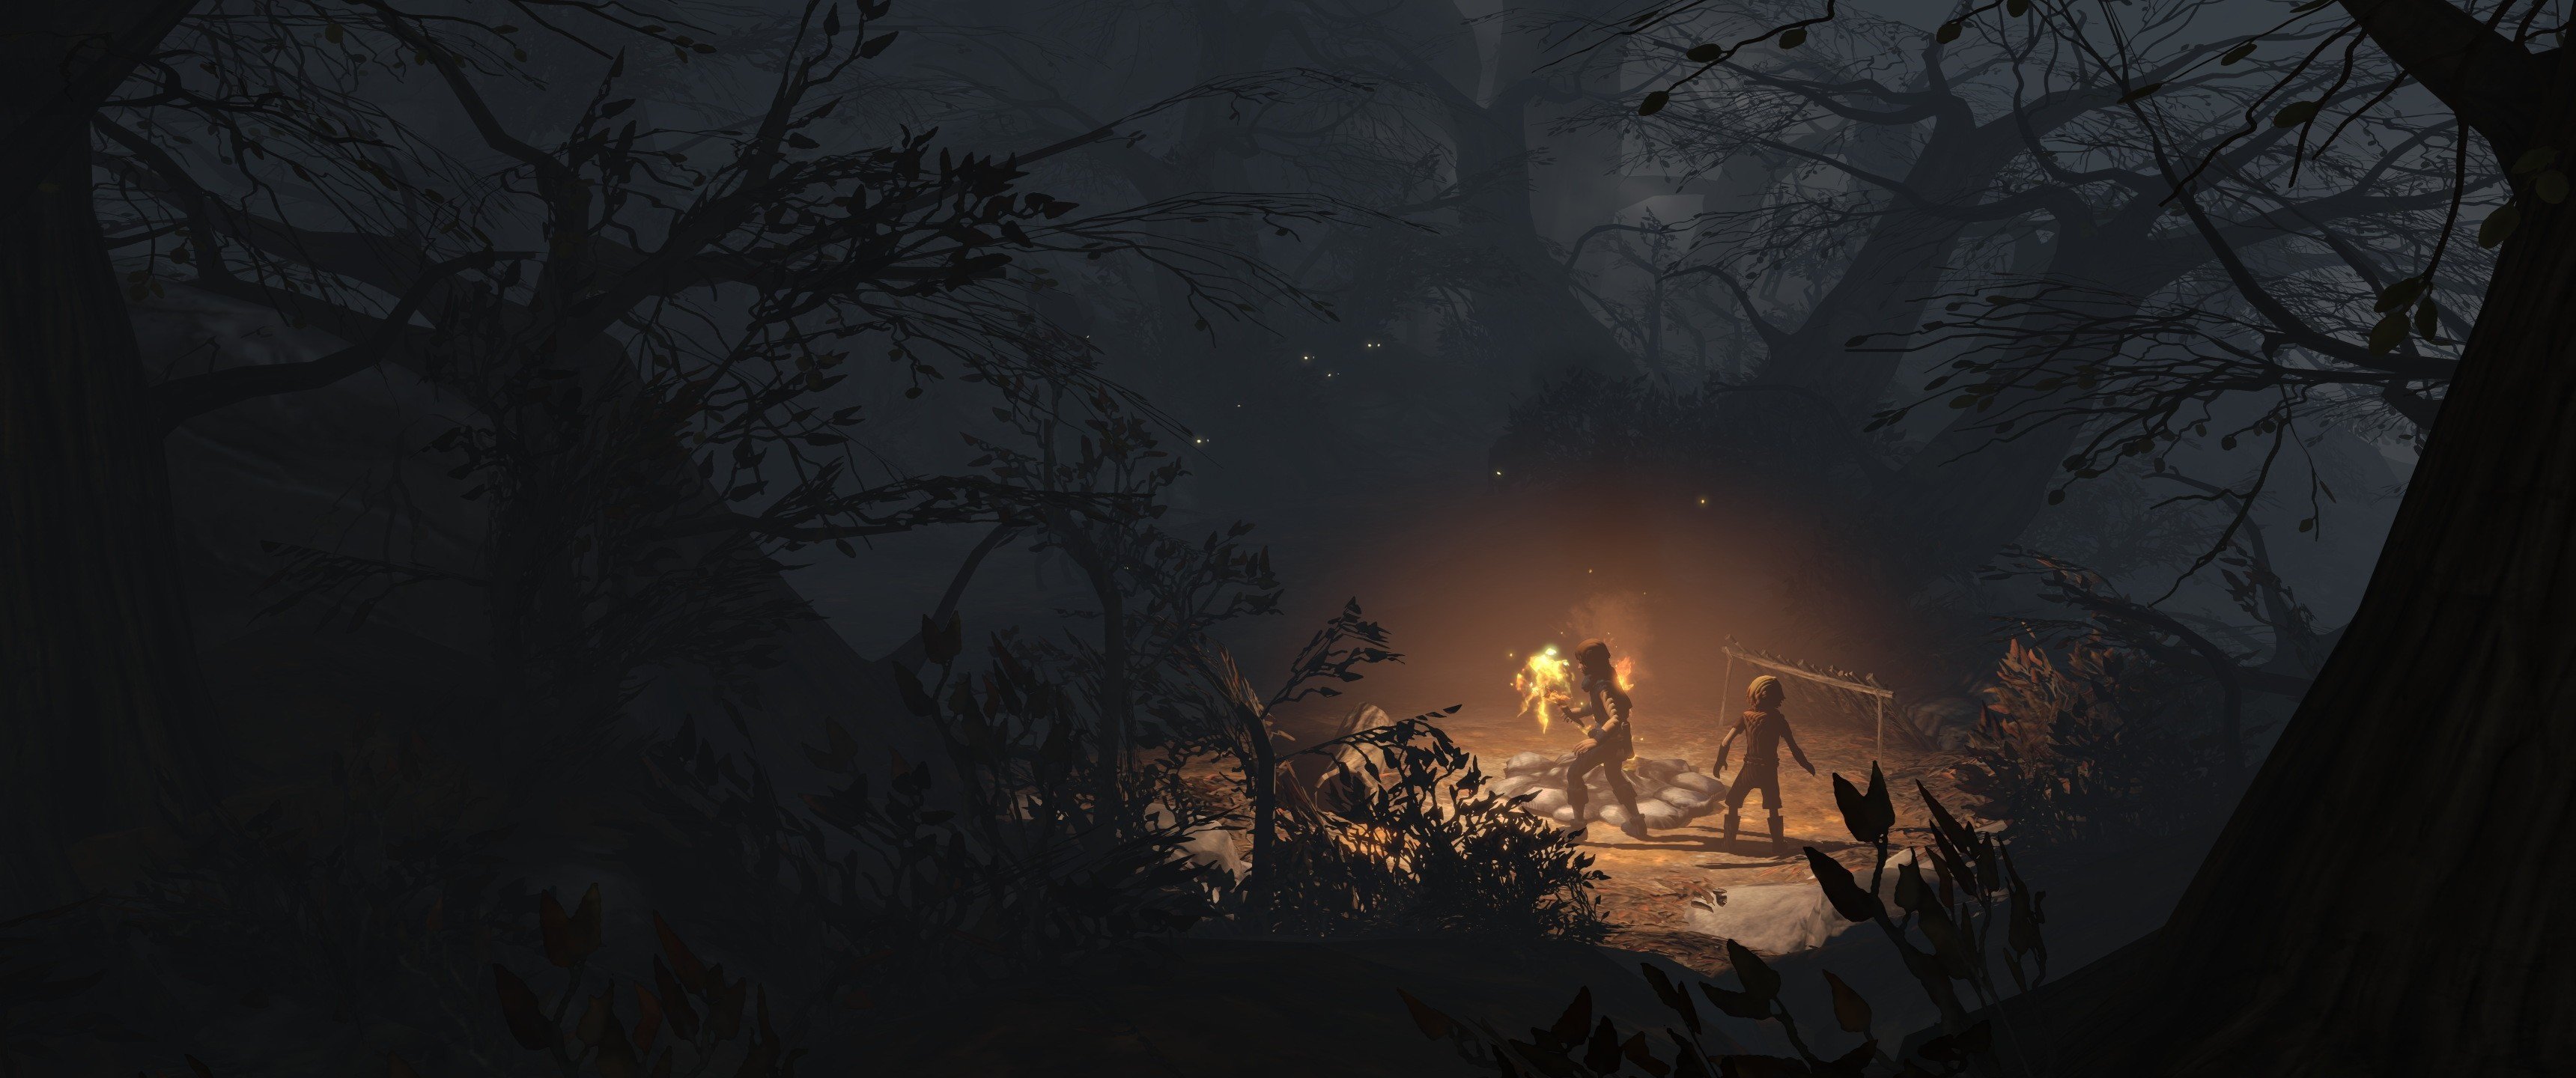 forest, video games, night, evening, morning, screen shot, moonlight, midnight, Brothers A Tale of Two Sons, darkness, screenshot, atmospheric phenomenon, geological phenomenon Gallery HD Wallpaper